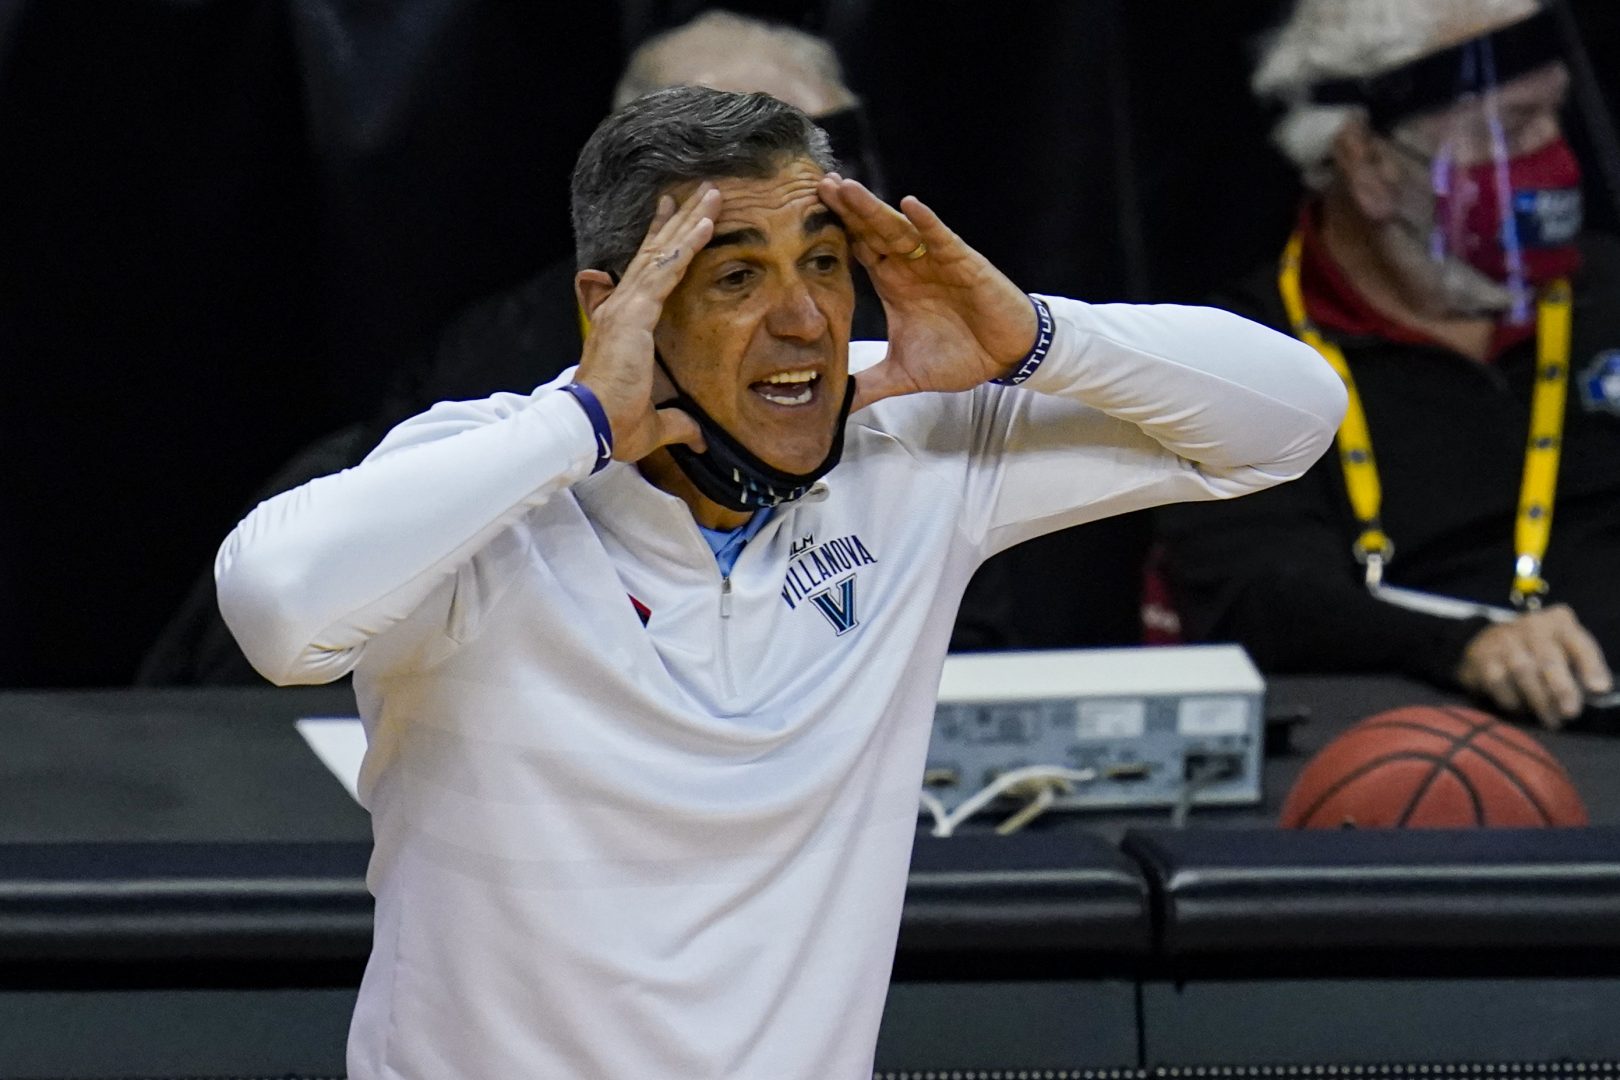 Villanova head coach Jay Wright yells to his team as they played against Winthrop in the second half of a first round game in the NCAA men's college basketball tournament at Farmers Coliseum in Indianapolis, Friday, March 19, 2021. (AP Photo/Michael Conroy)